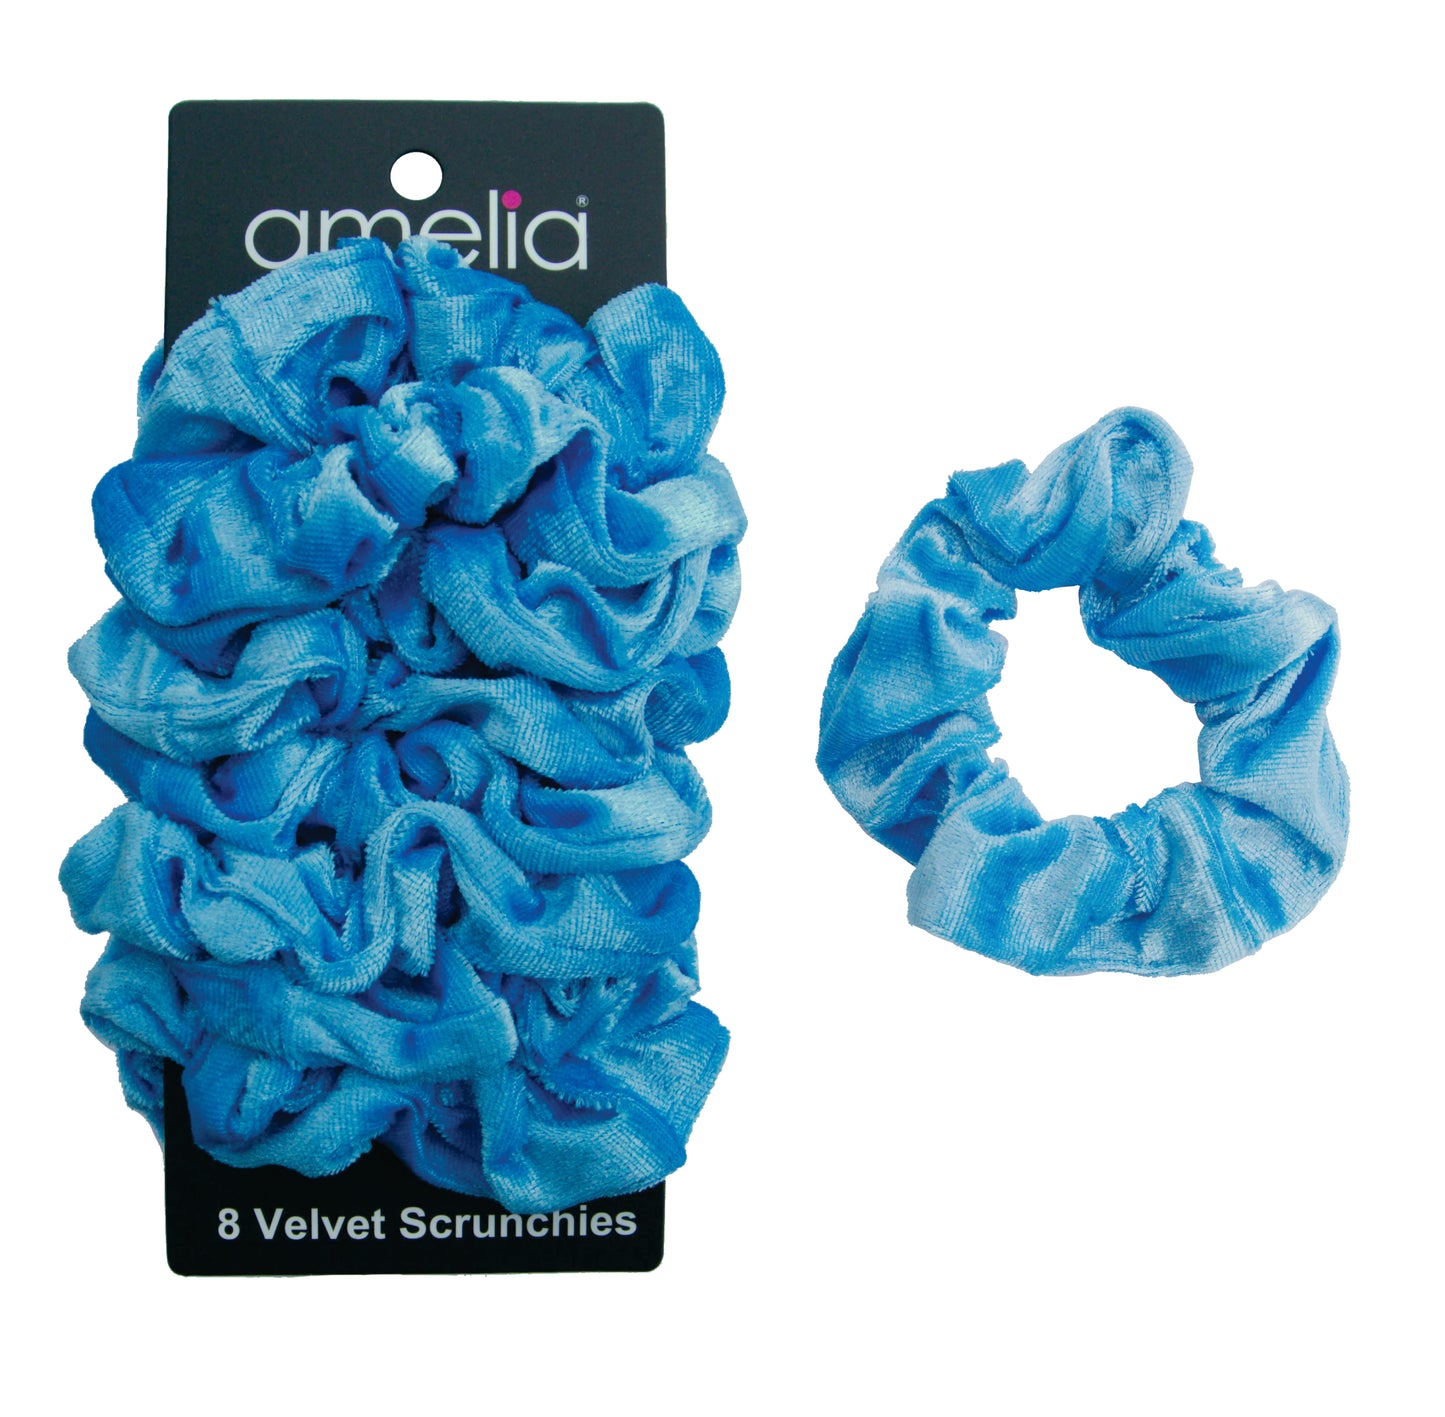 Amelia Beauty, Sky Blue Velvet Scrunchies, 3.5in Diameter, Gentle on Hair, Strong Hold, No Snag, No Dents or Creases. 8 Pack